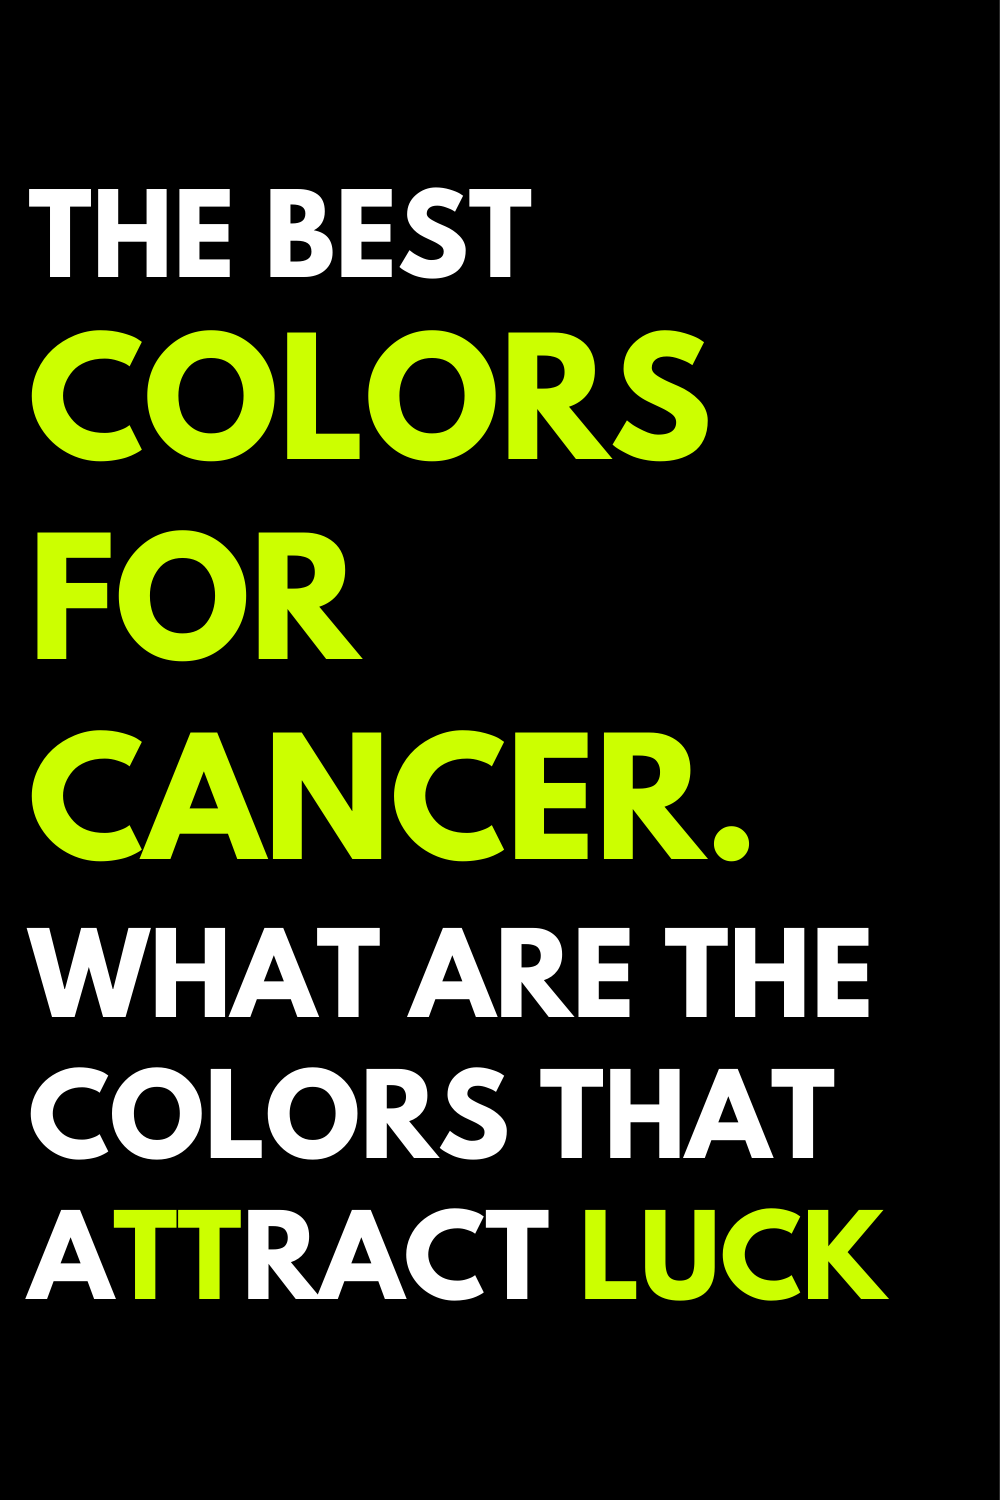 The best colors for Cancer. What are the colors that attract luck